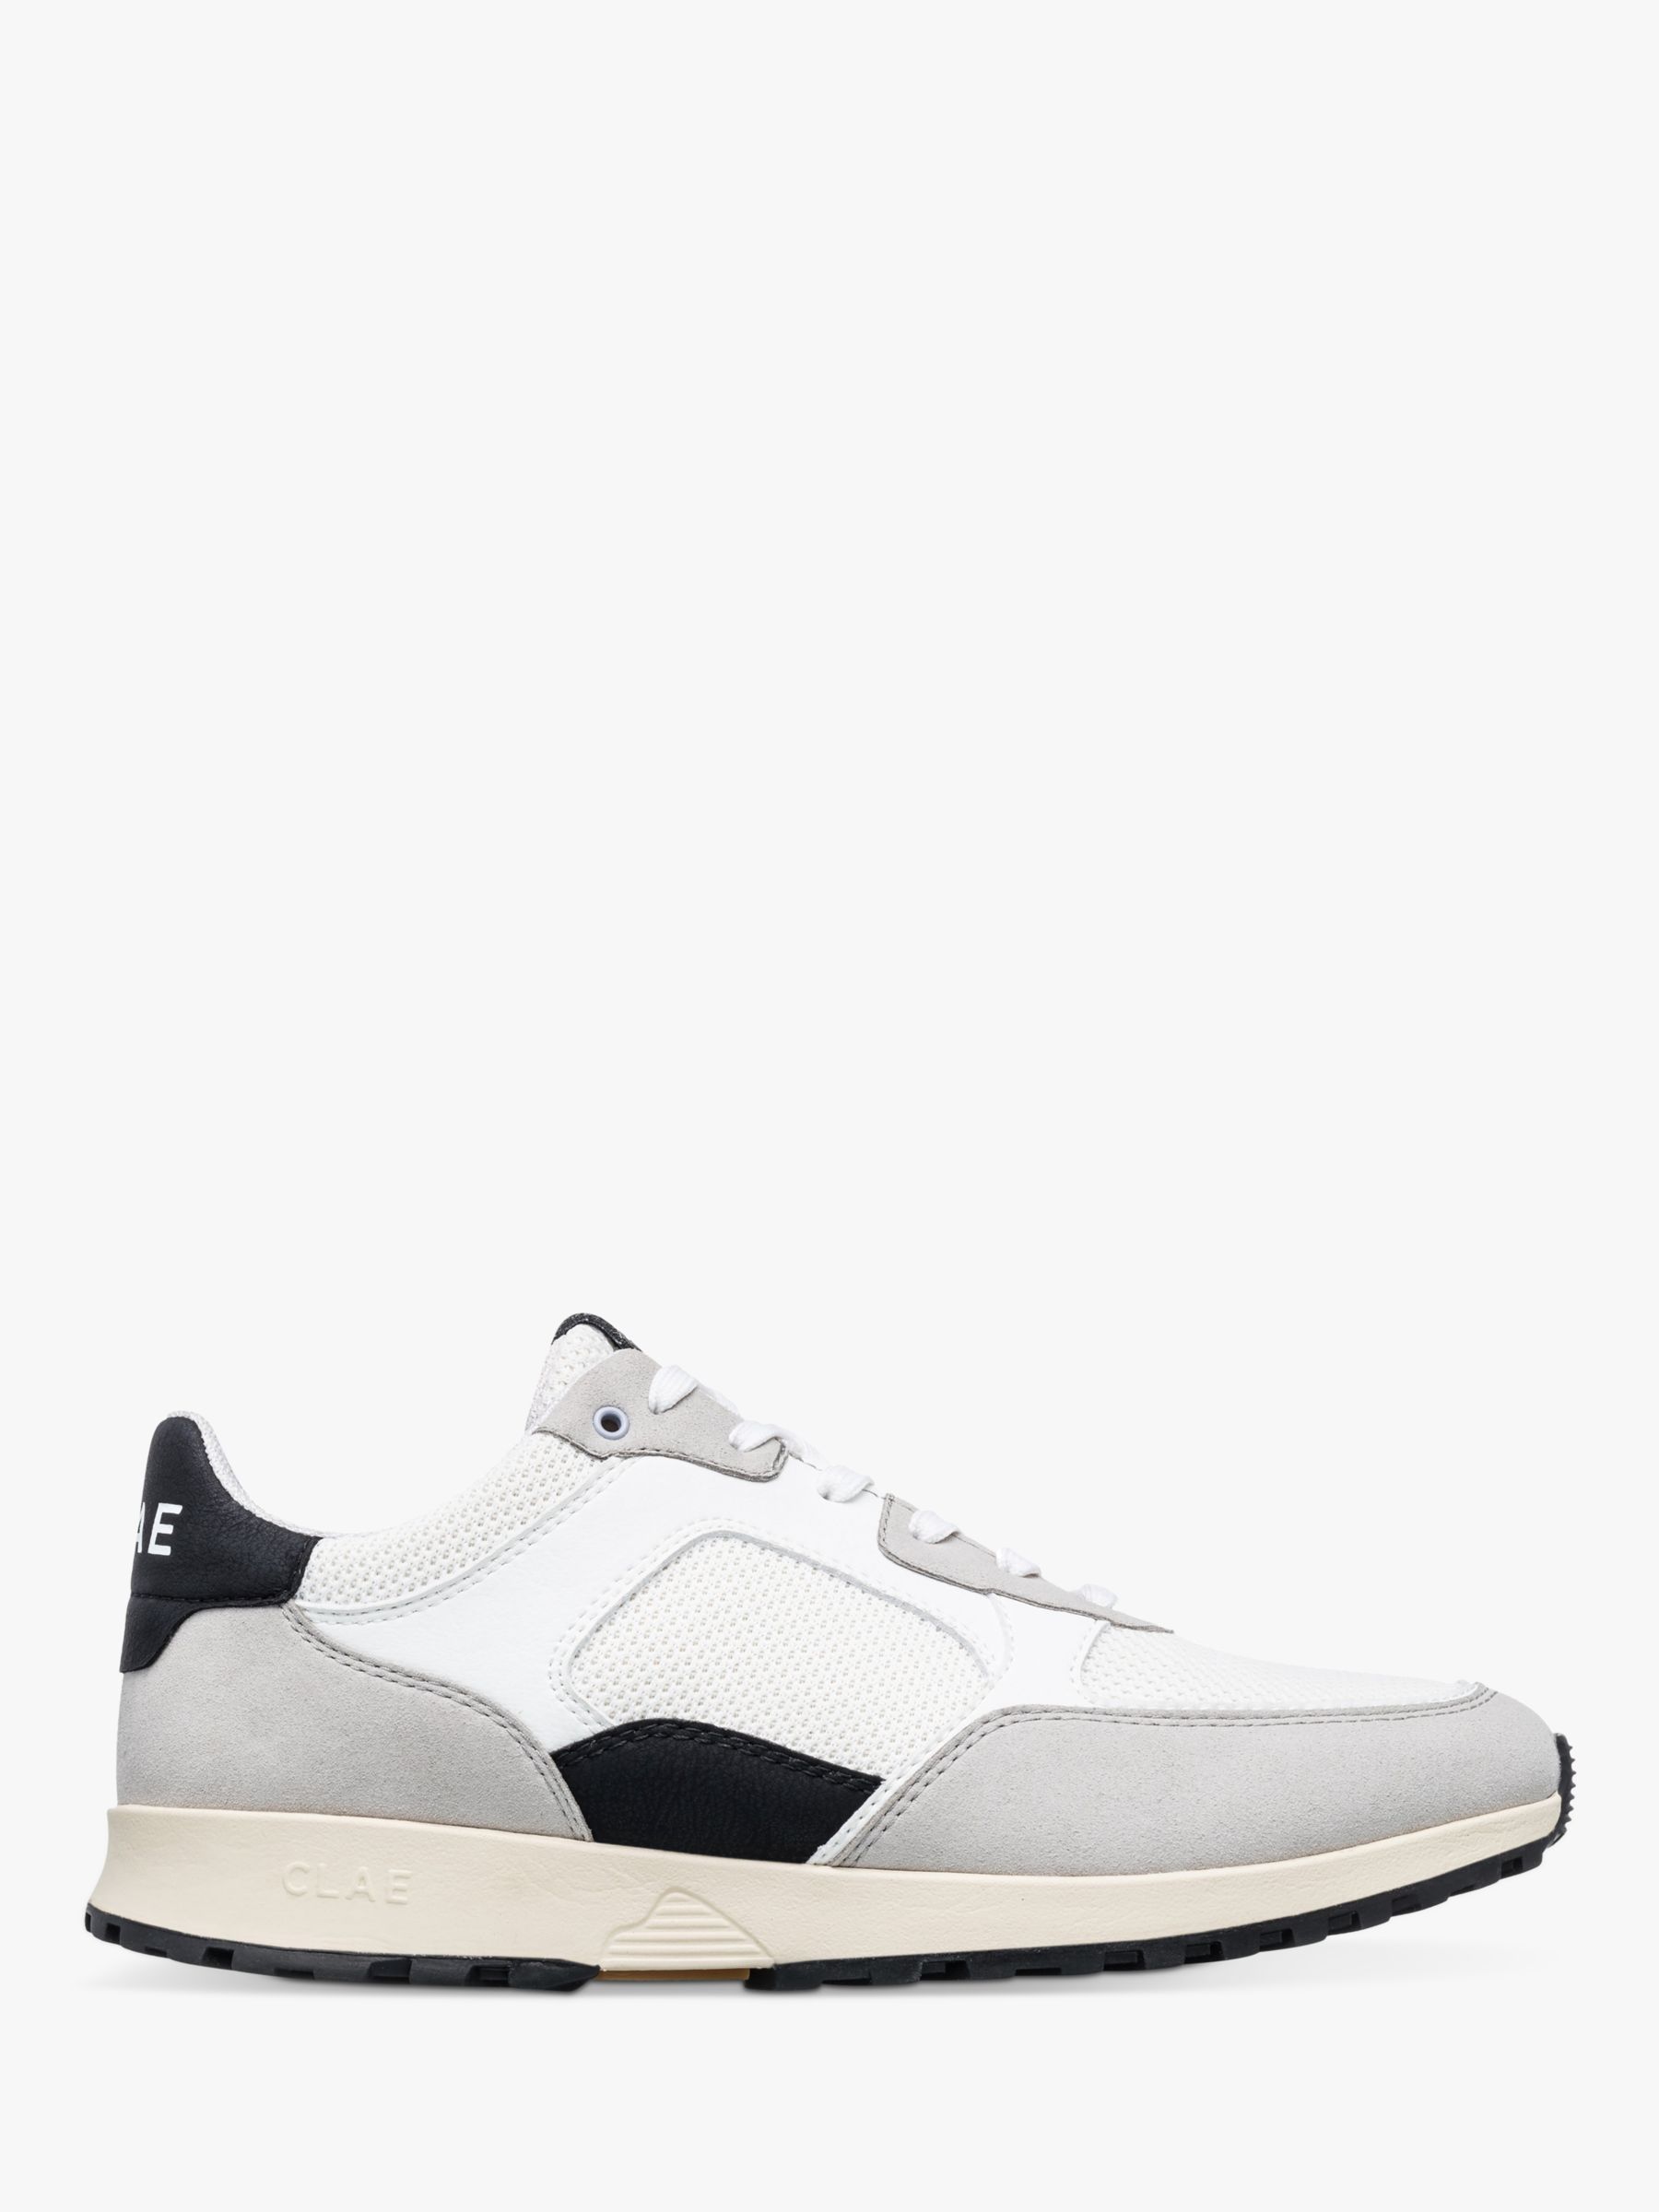 CLAE Joshua Lace Up Trainers, Microchip White/Black at John Lewis ...